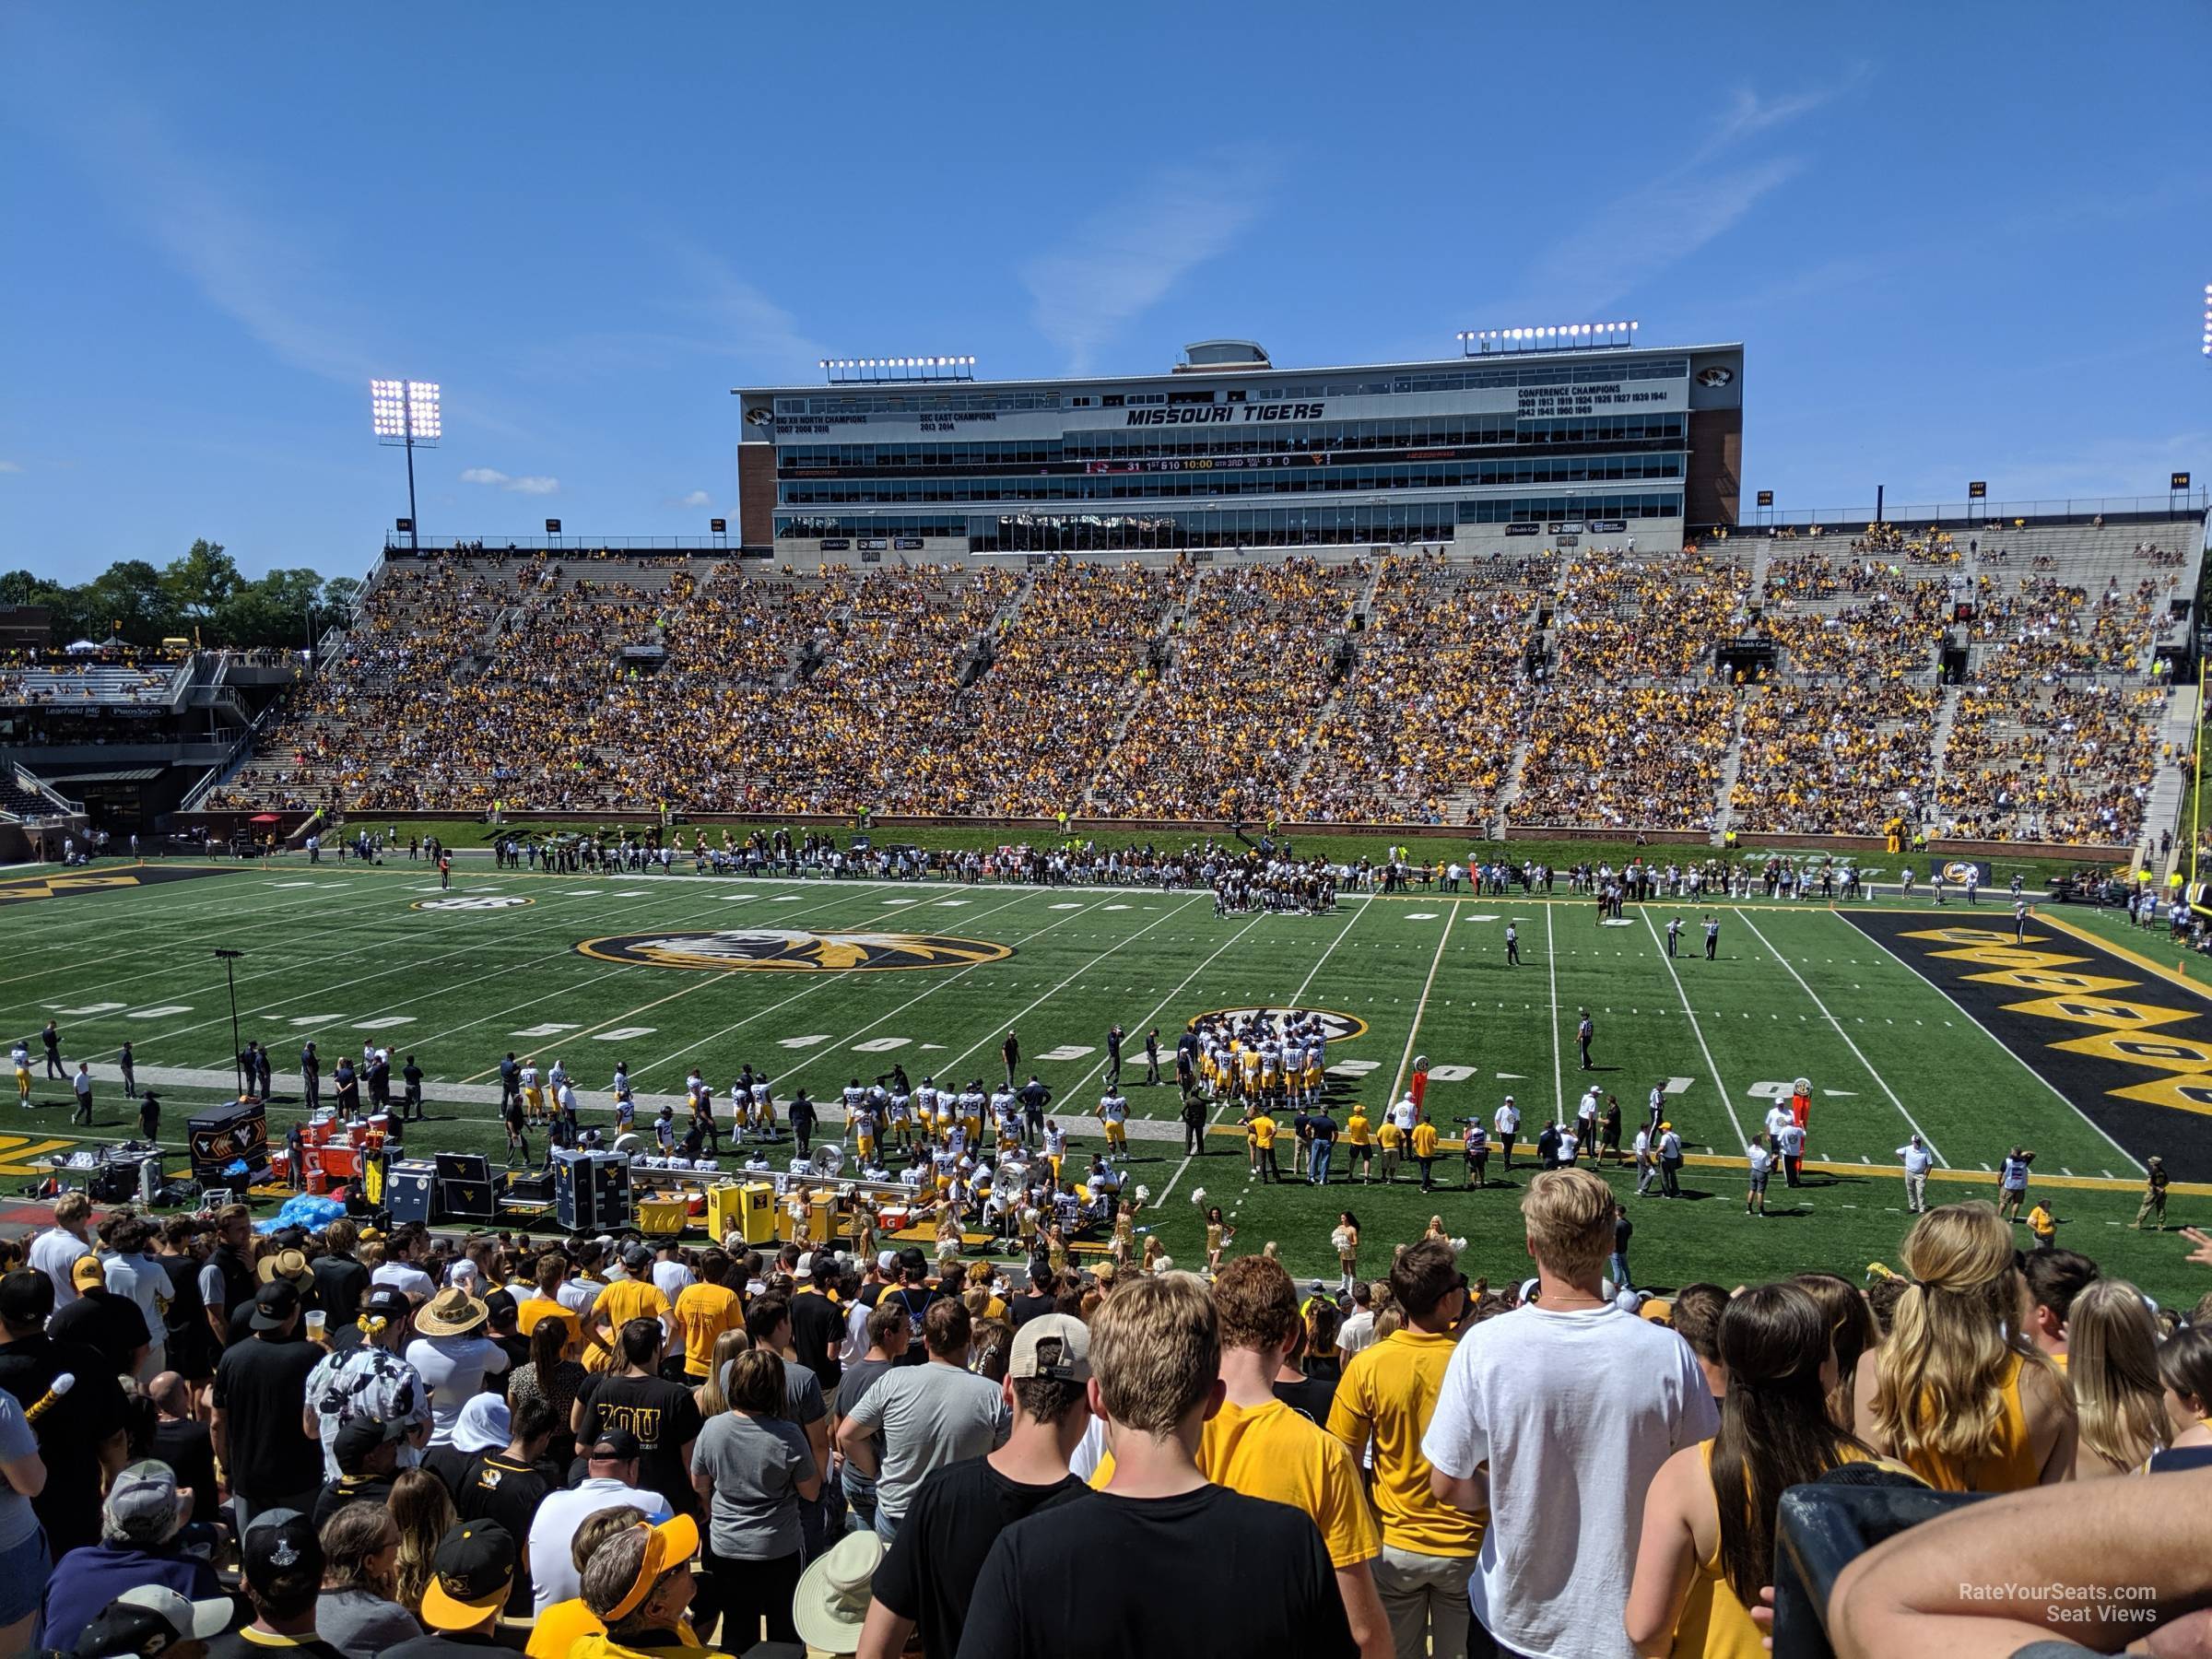 section 108, row 38 seat view  - faurot field